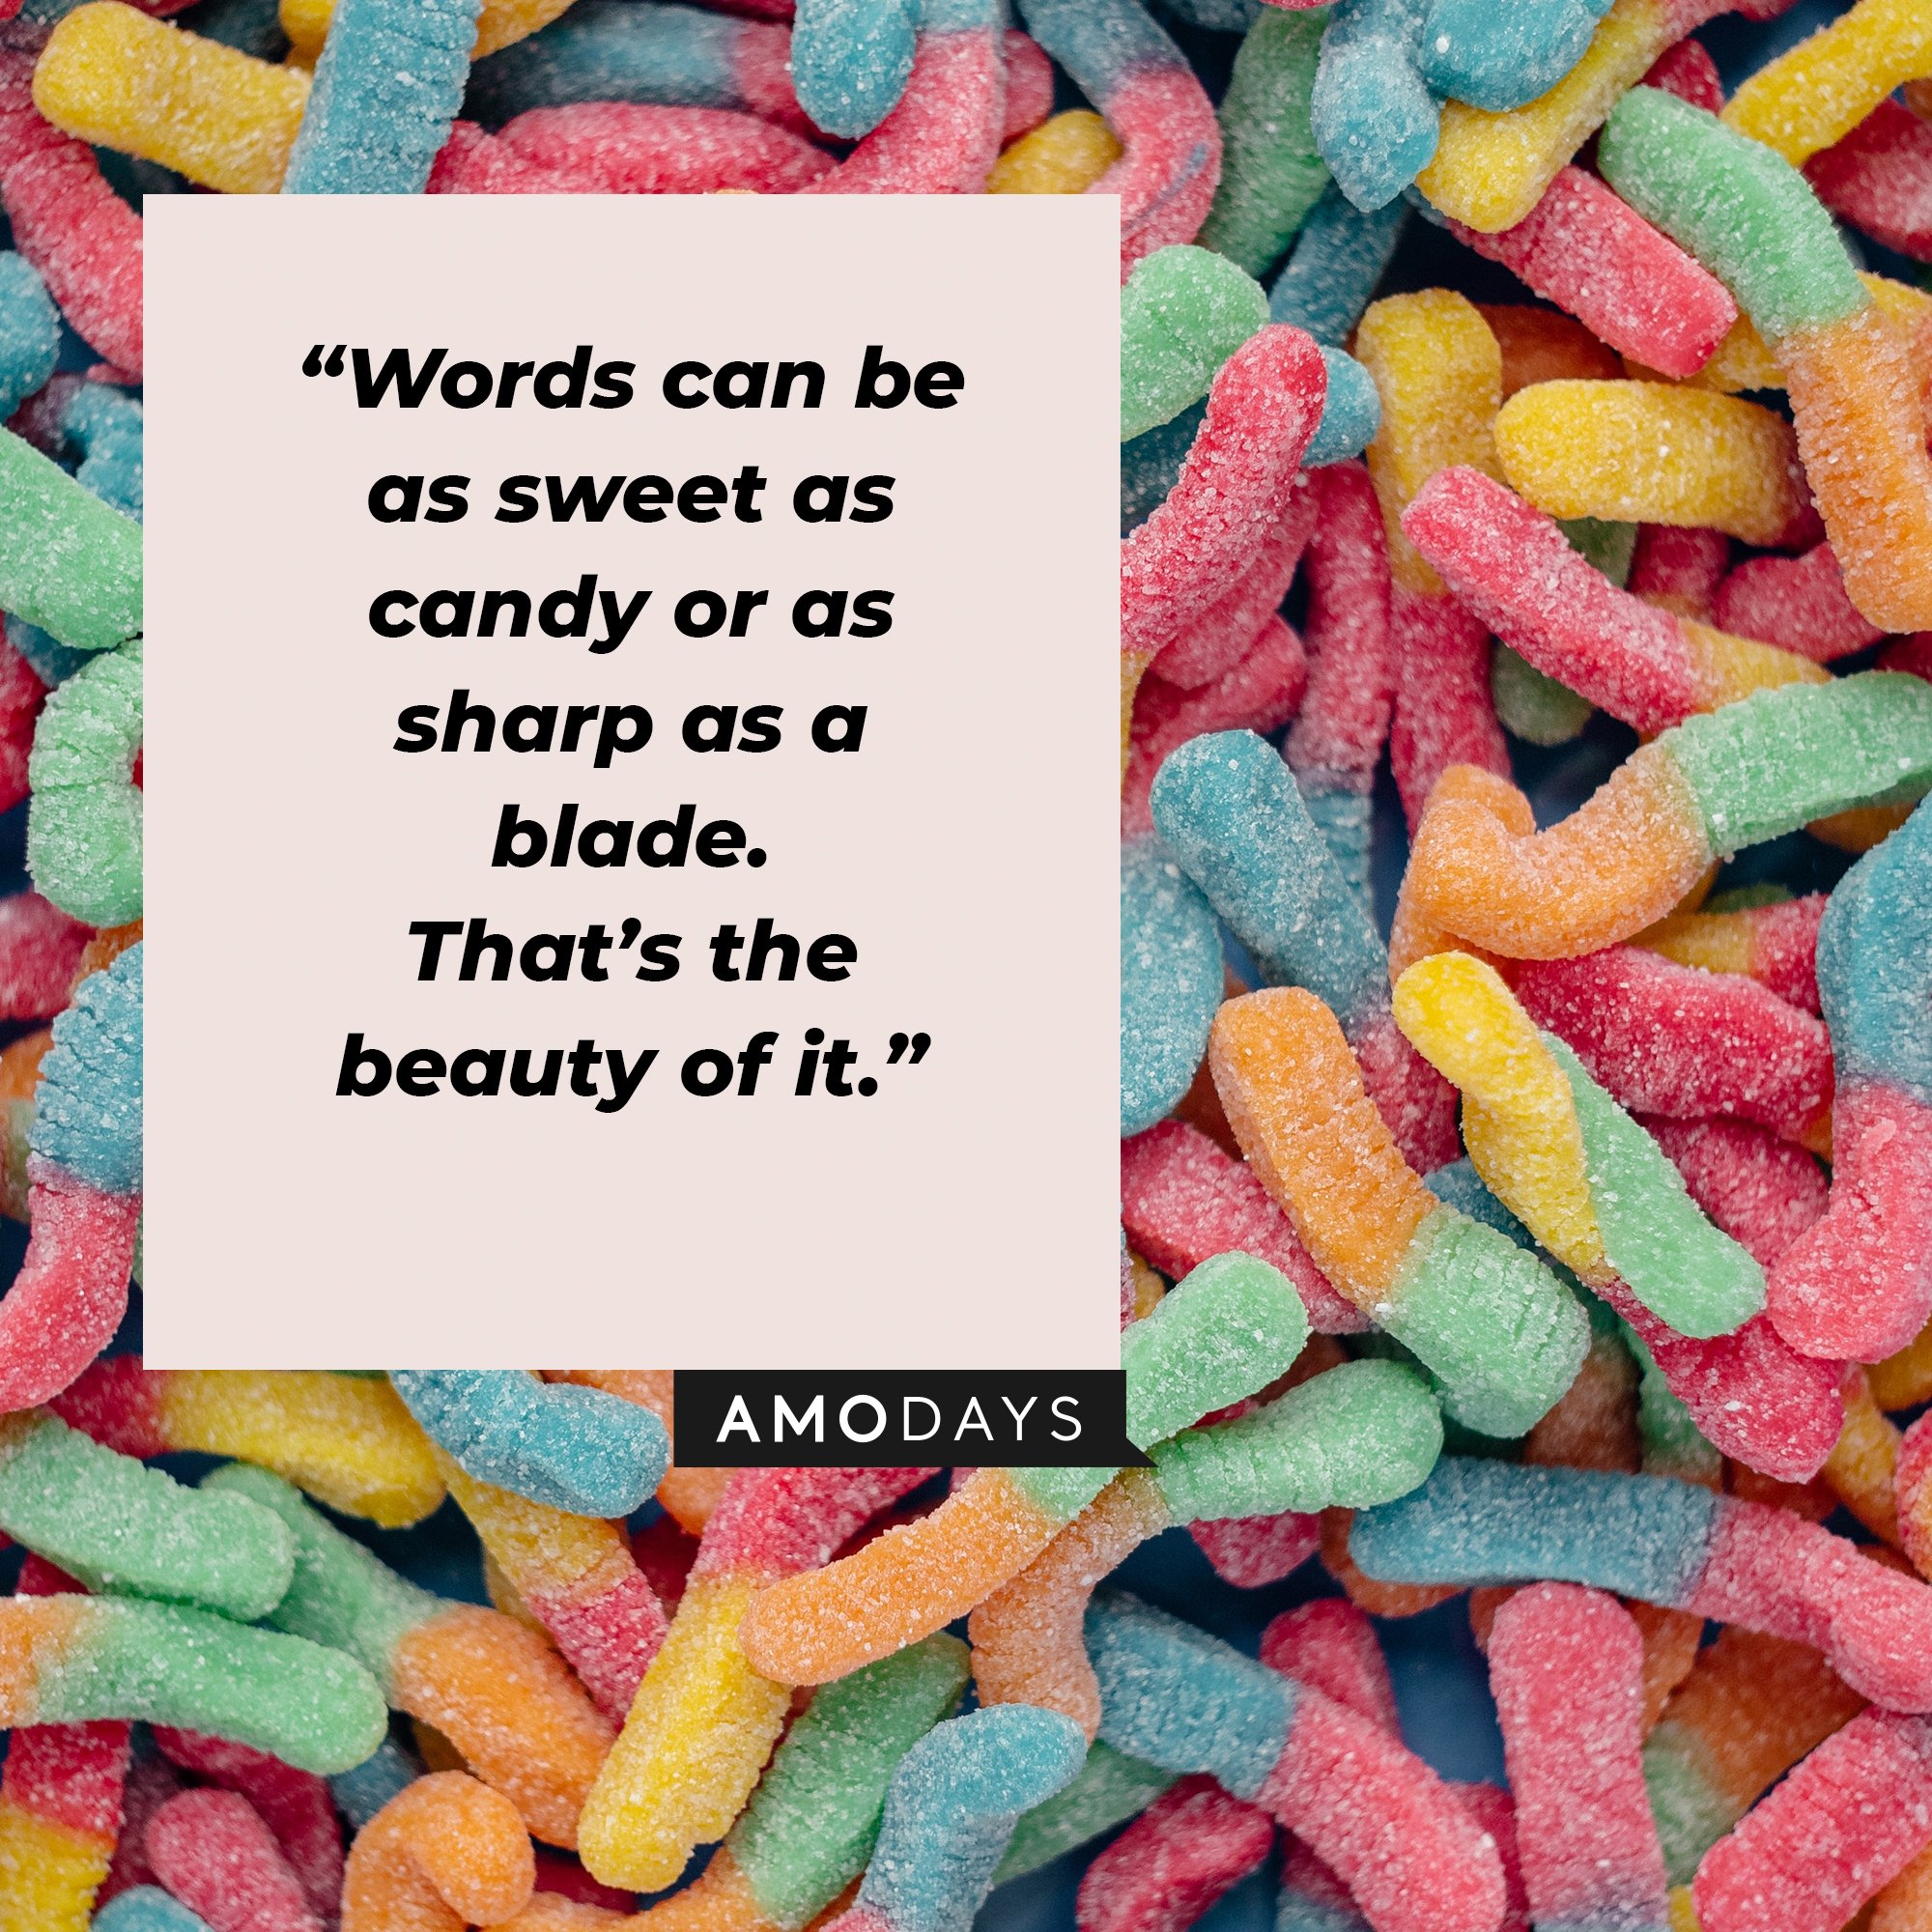 Juice WRLD’s quote: “Words can be as sweet as candy or as sharp as a blade. That’s the beauty of it.” | Image: AmoDays